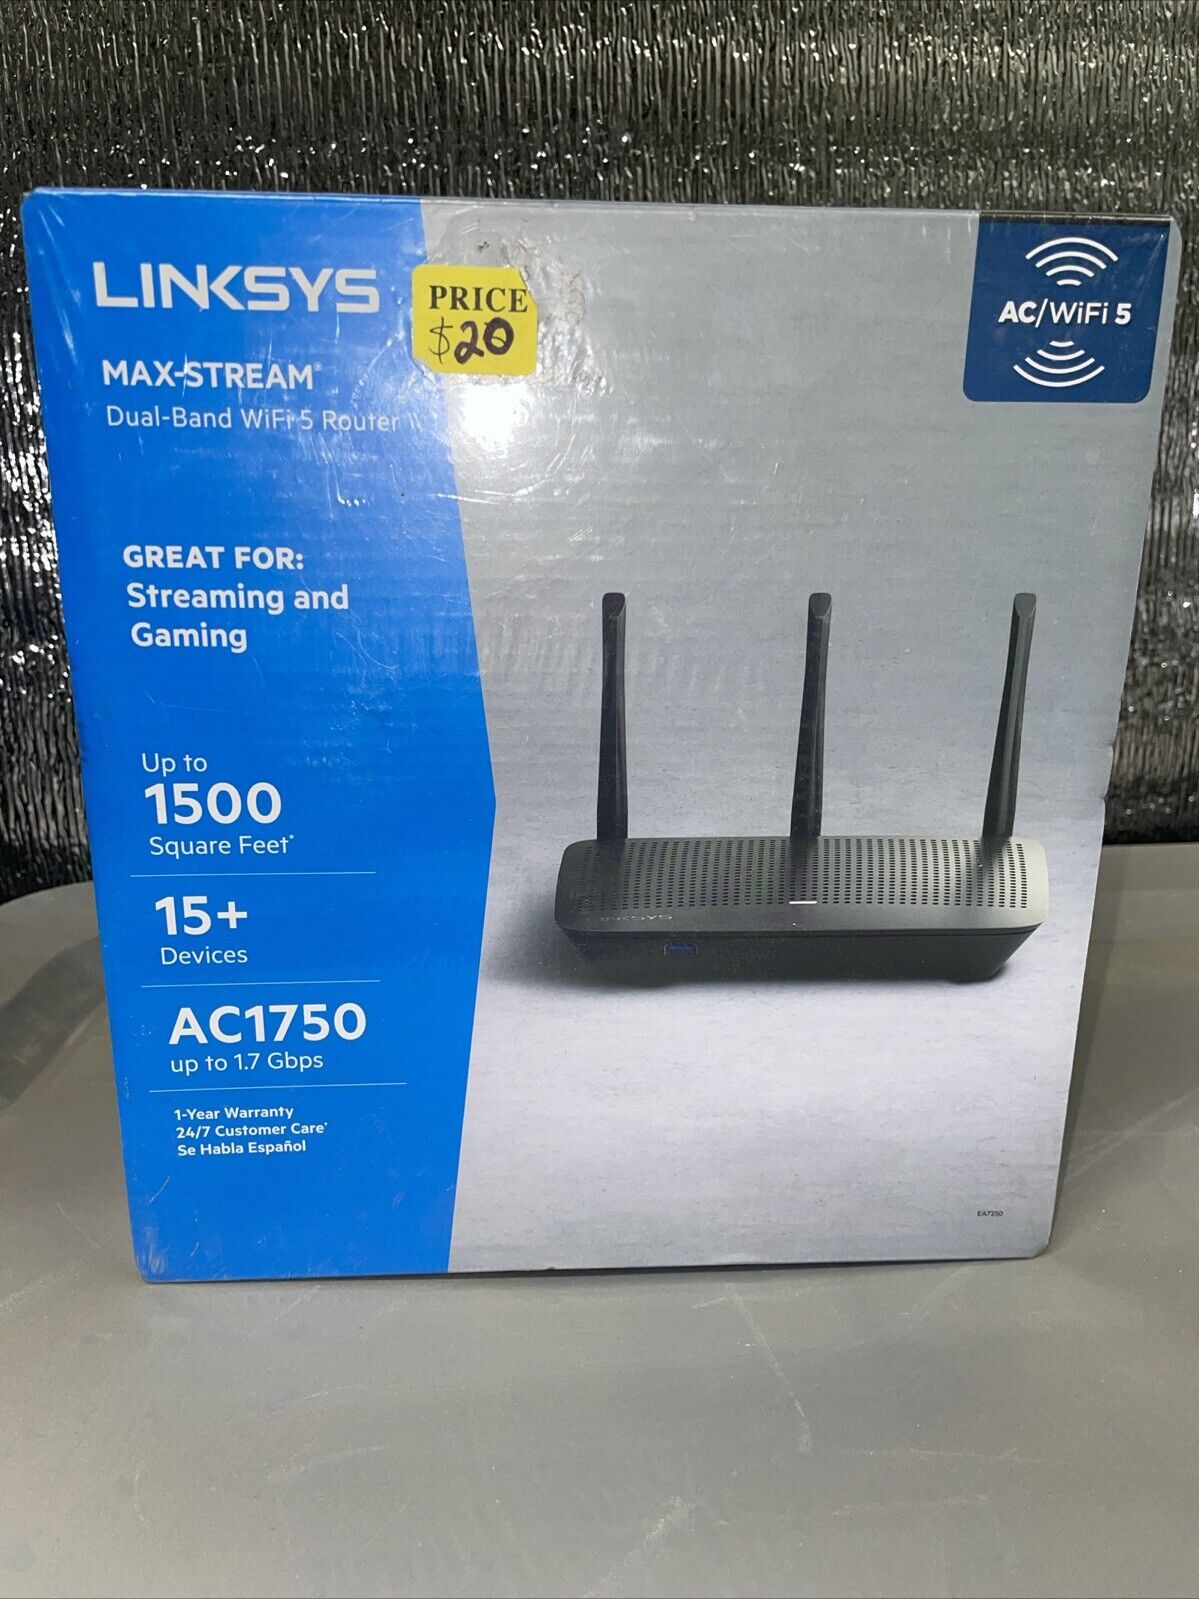 Linksys MAX-STREAM EA7250 AC1750 Dual-Band 1.7 Gbps WiFi 5 Router